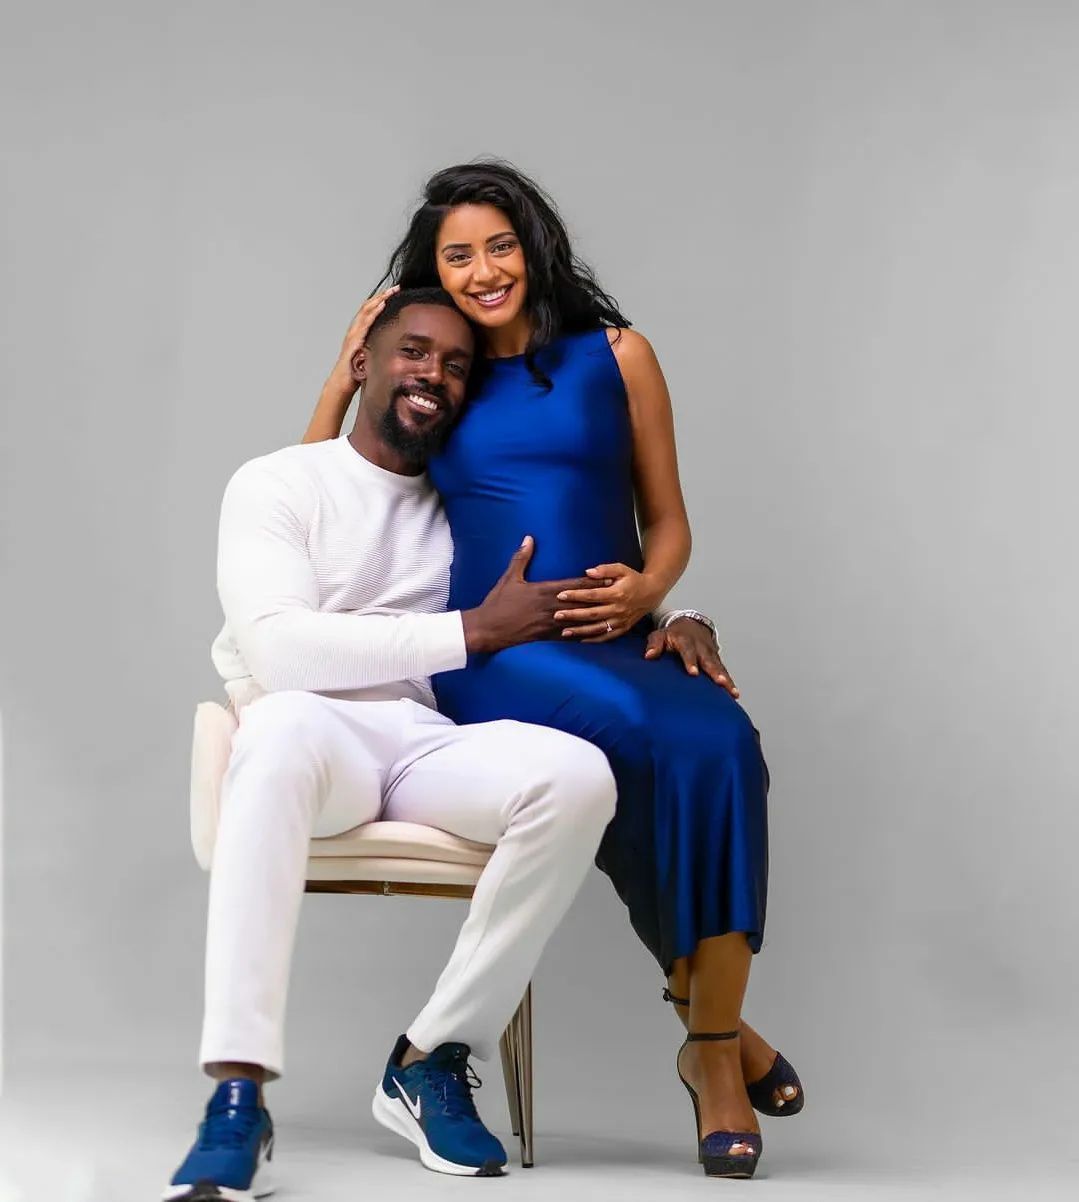 Actor Mawuli Gavor and his woman Remya expecting their first child (photos)